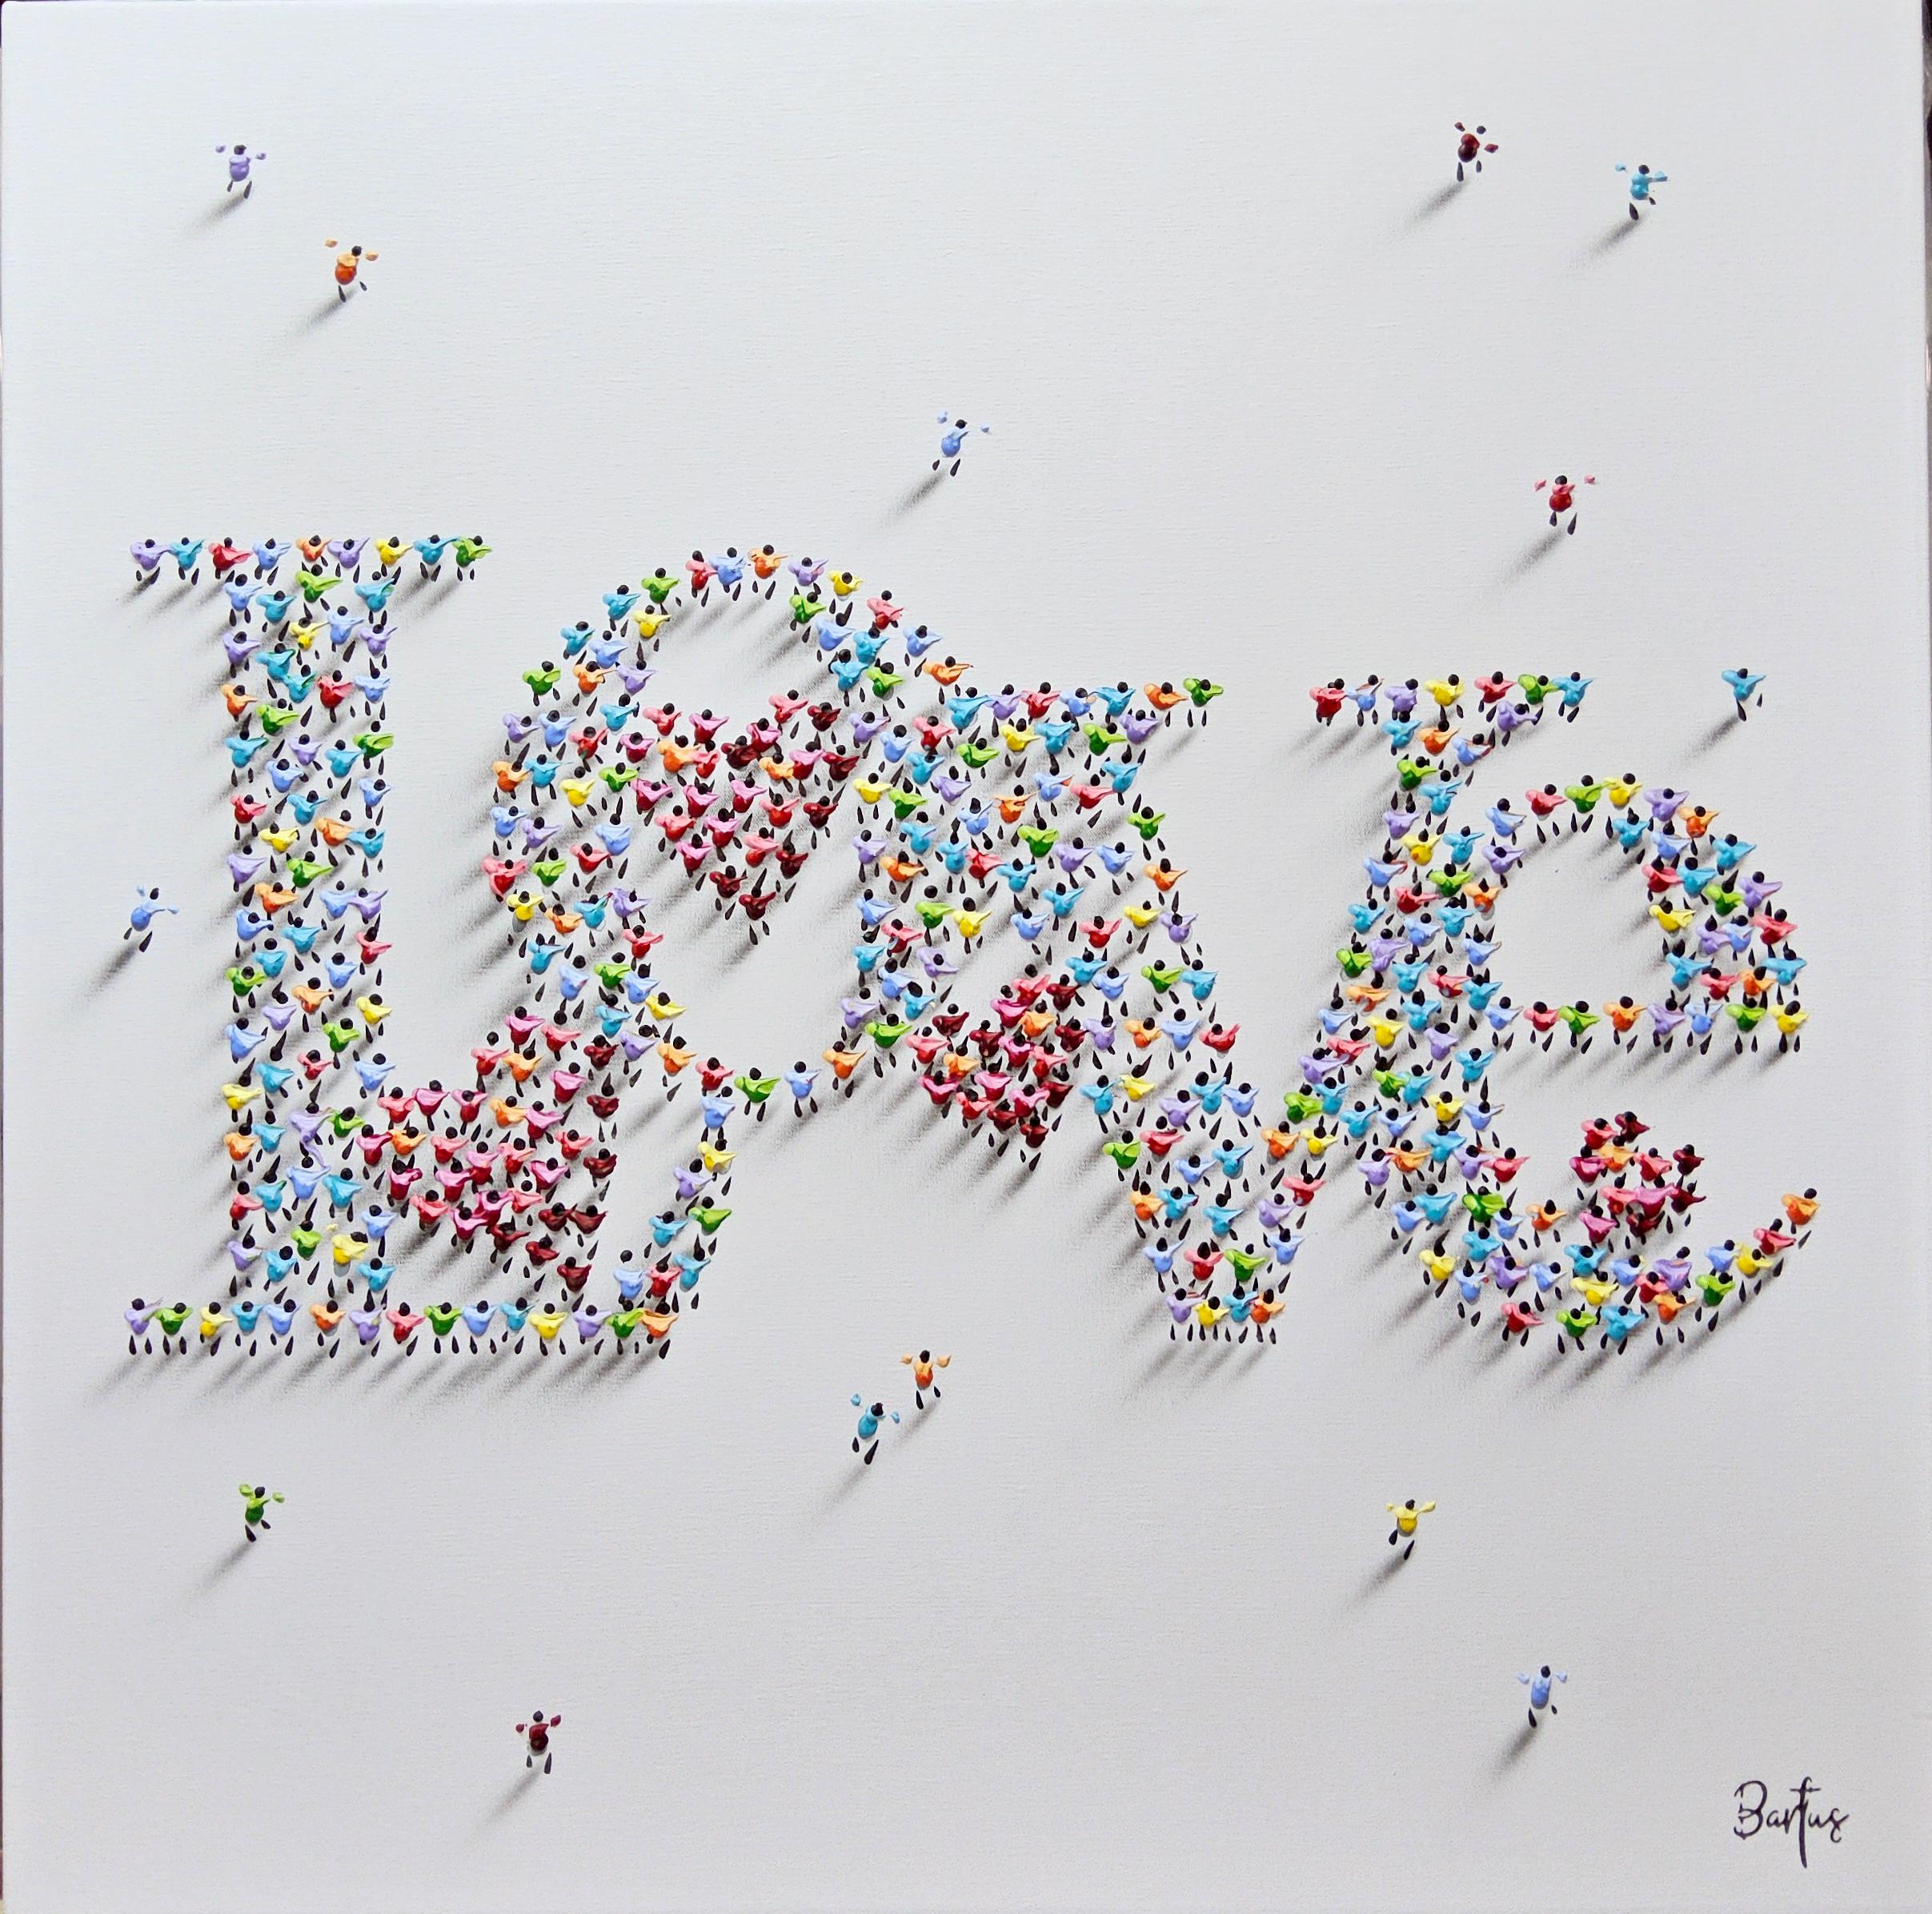 This piece, "All You Need is Love", is a 32x32 mixed media painting on canvas by artist Francisco Bartus. Featured is a script made up of individual helpings of paint, spelling out the word LOVE surrounded by small red hearts.  The figures are